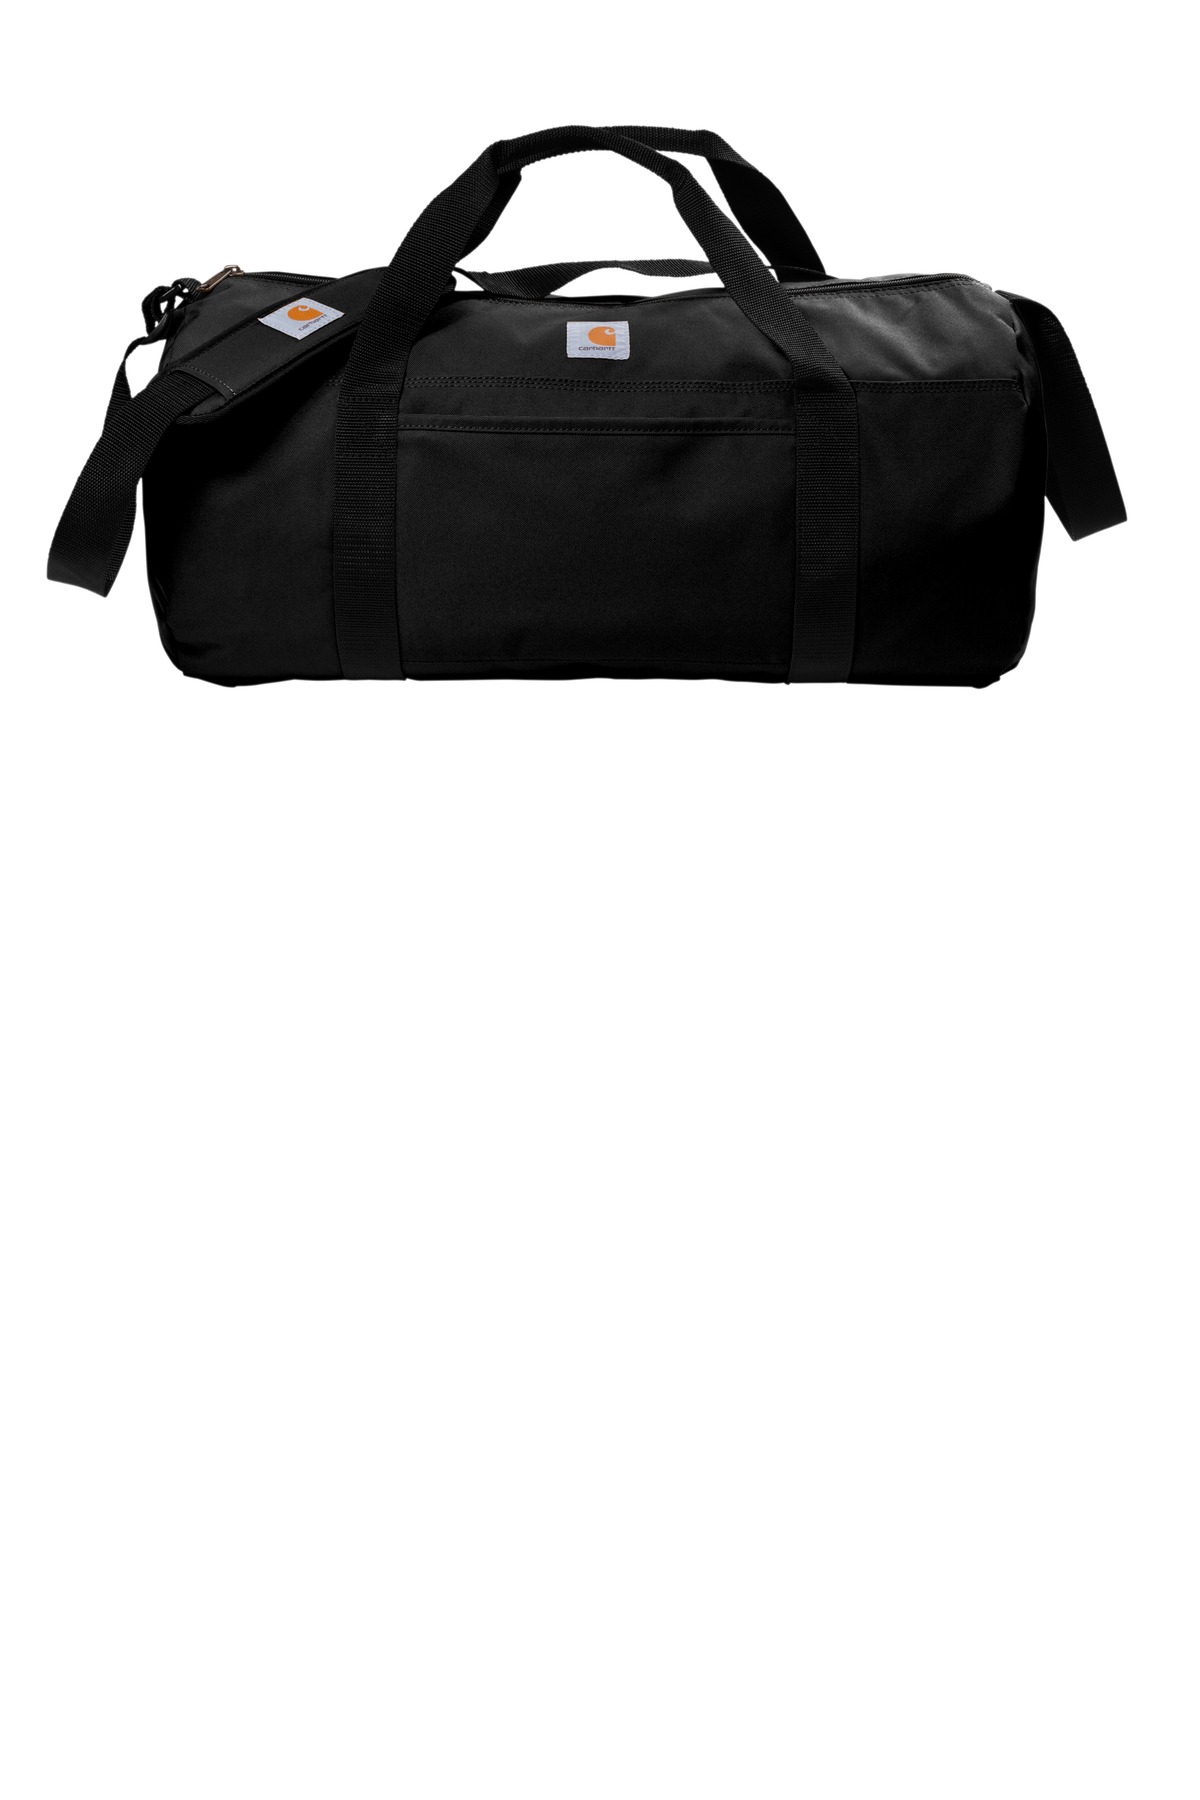 Carhartt  Canvas Packable Duffel with Pouch. CT89105112